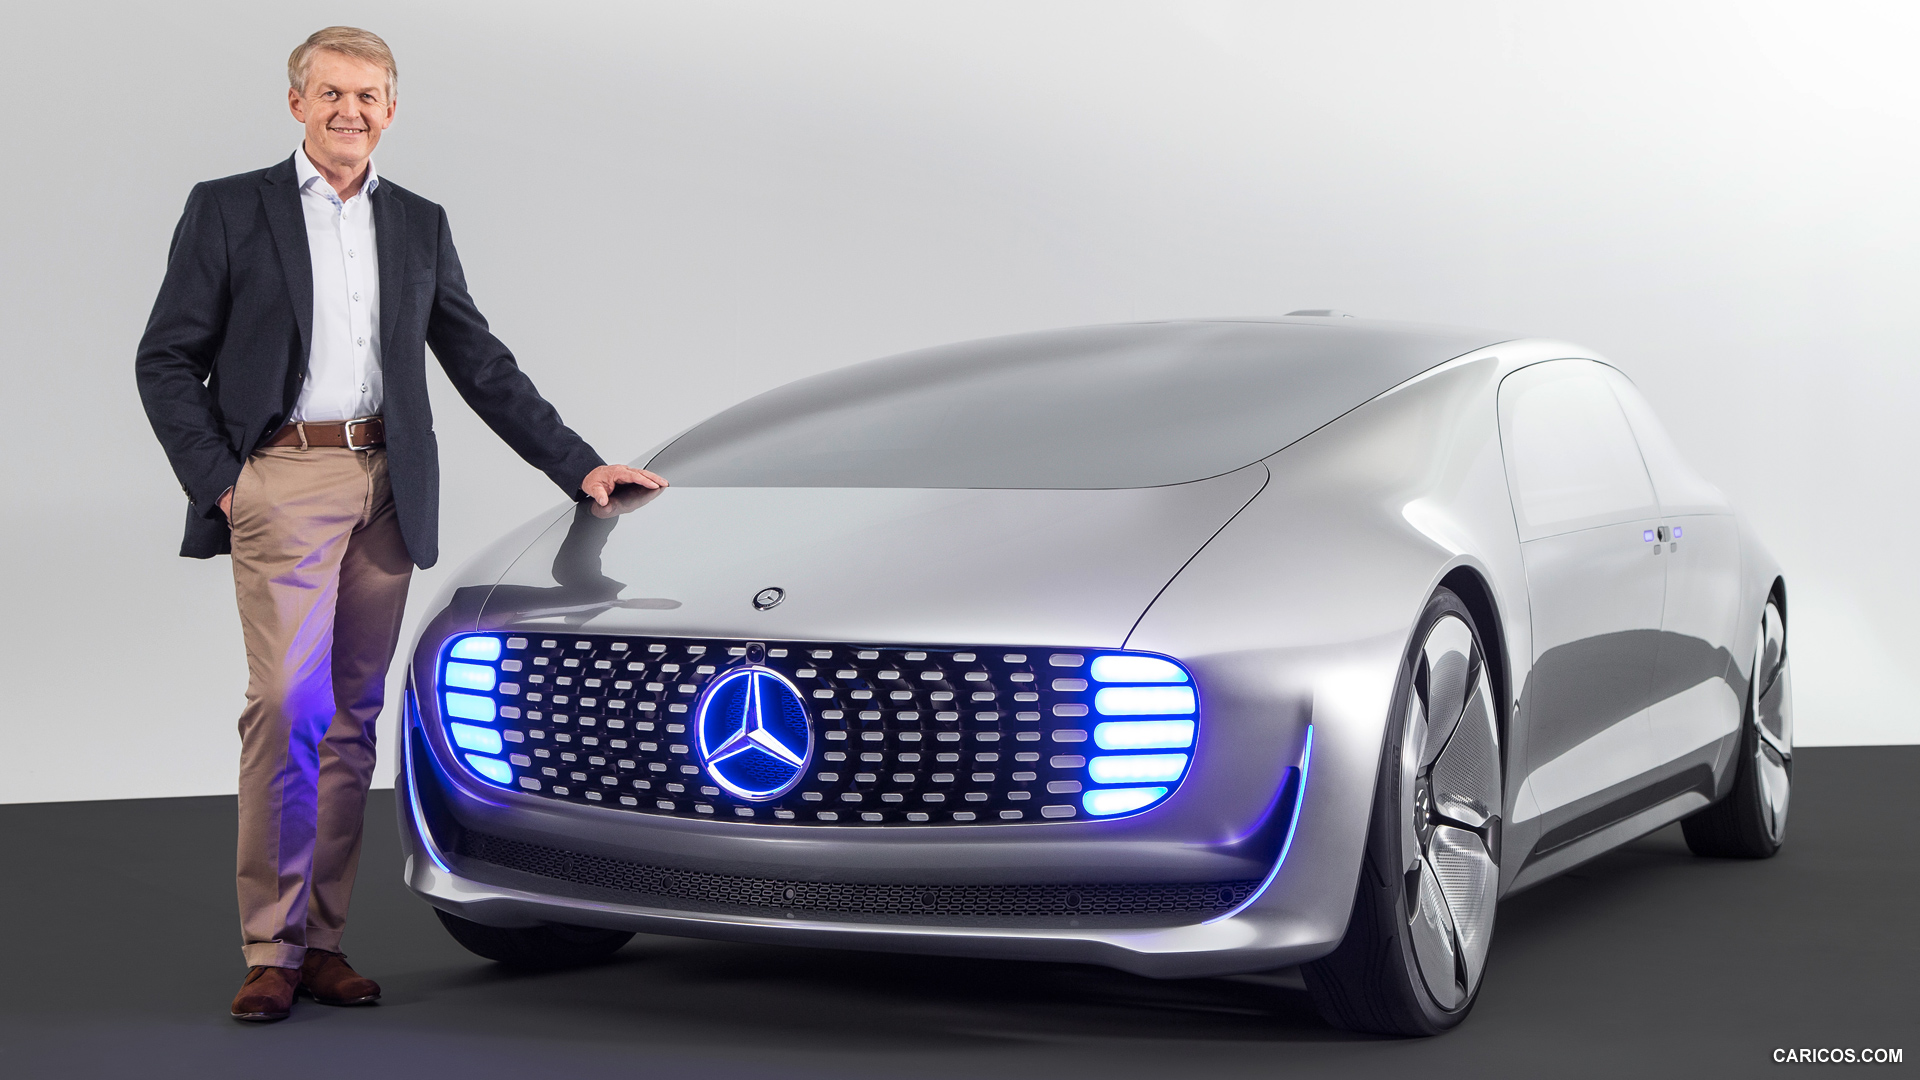 2015 Mercedes-Benz F 015 Luxury in Motion Concept  - Front, #72 of 92